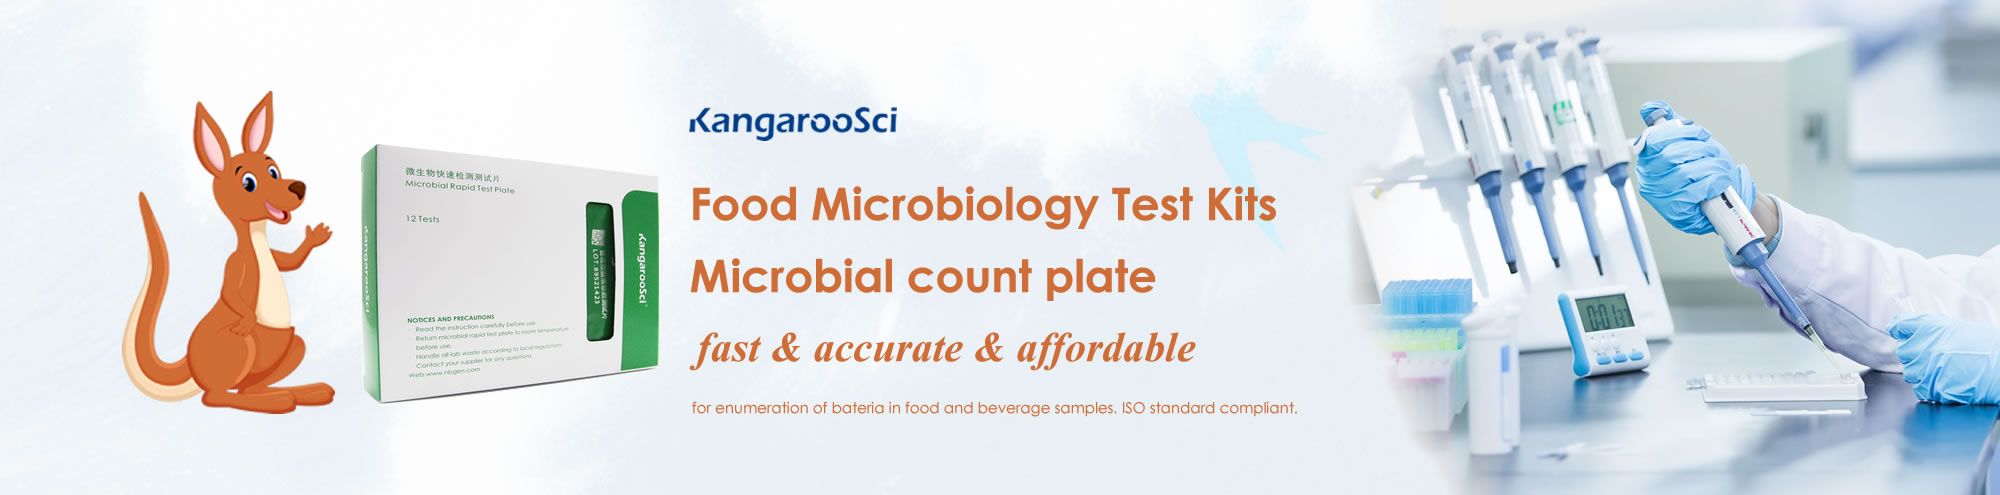 Ringbio KangarooSci Microbial Count Plate - New Option for food microbiology testing